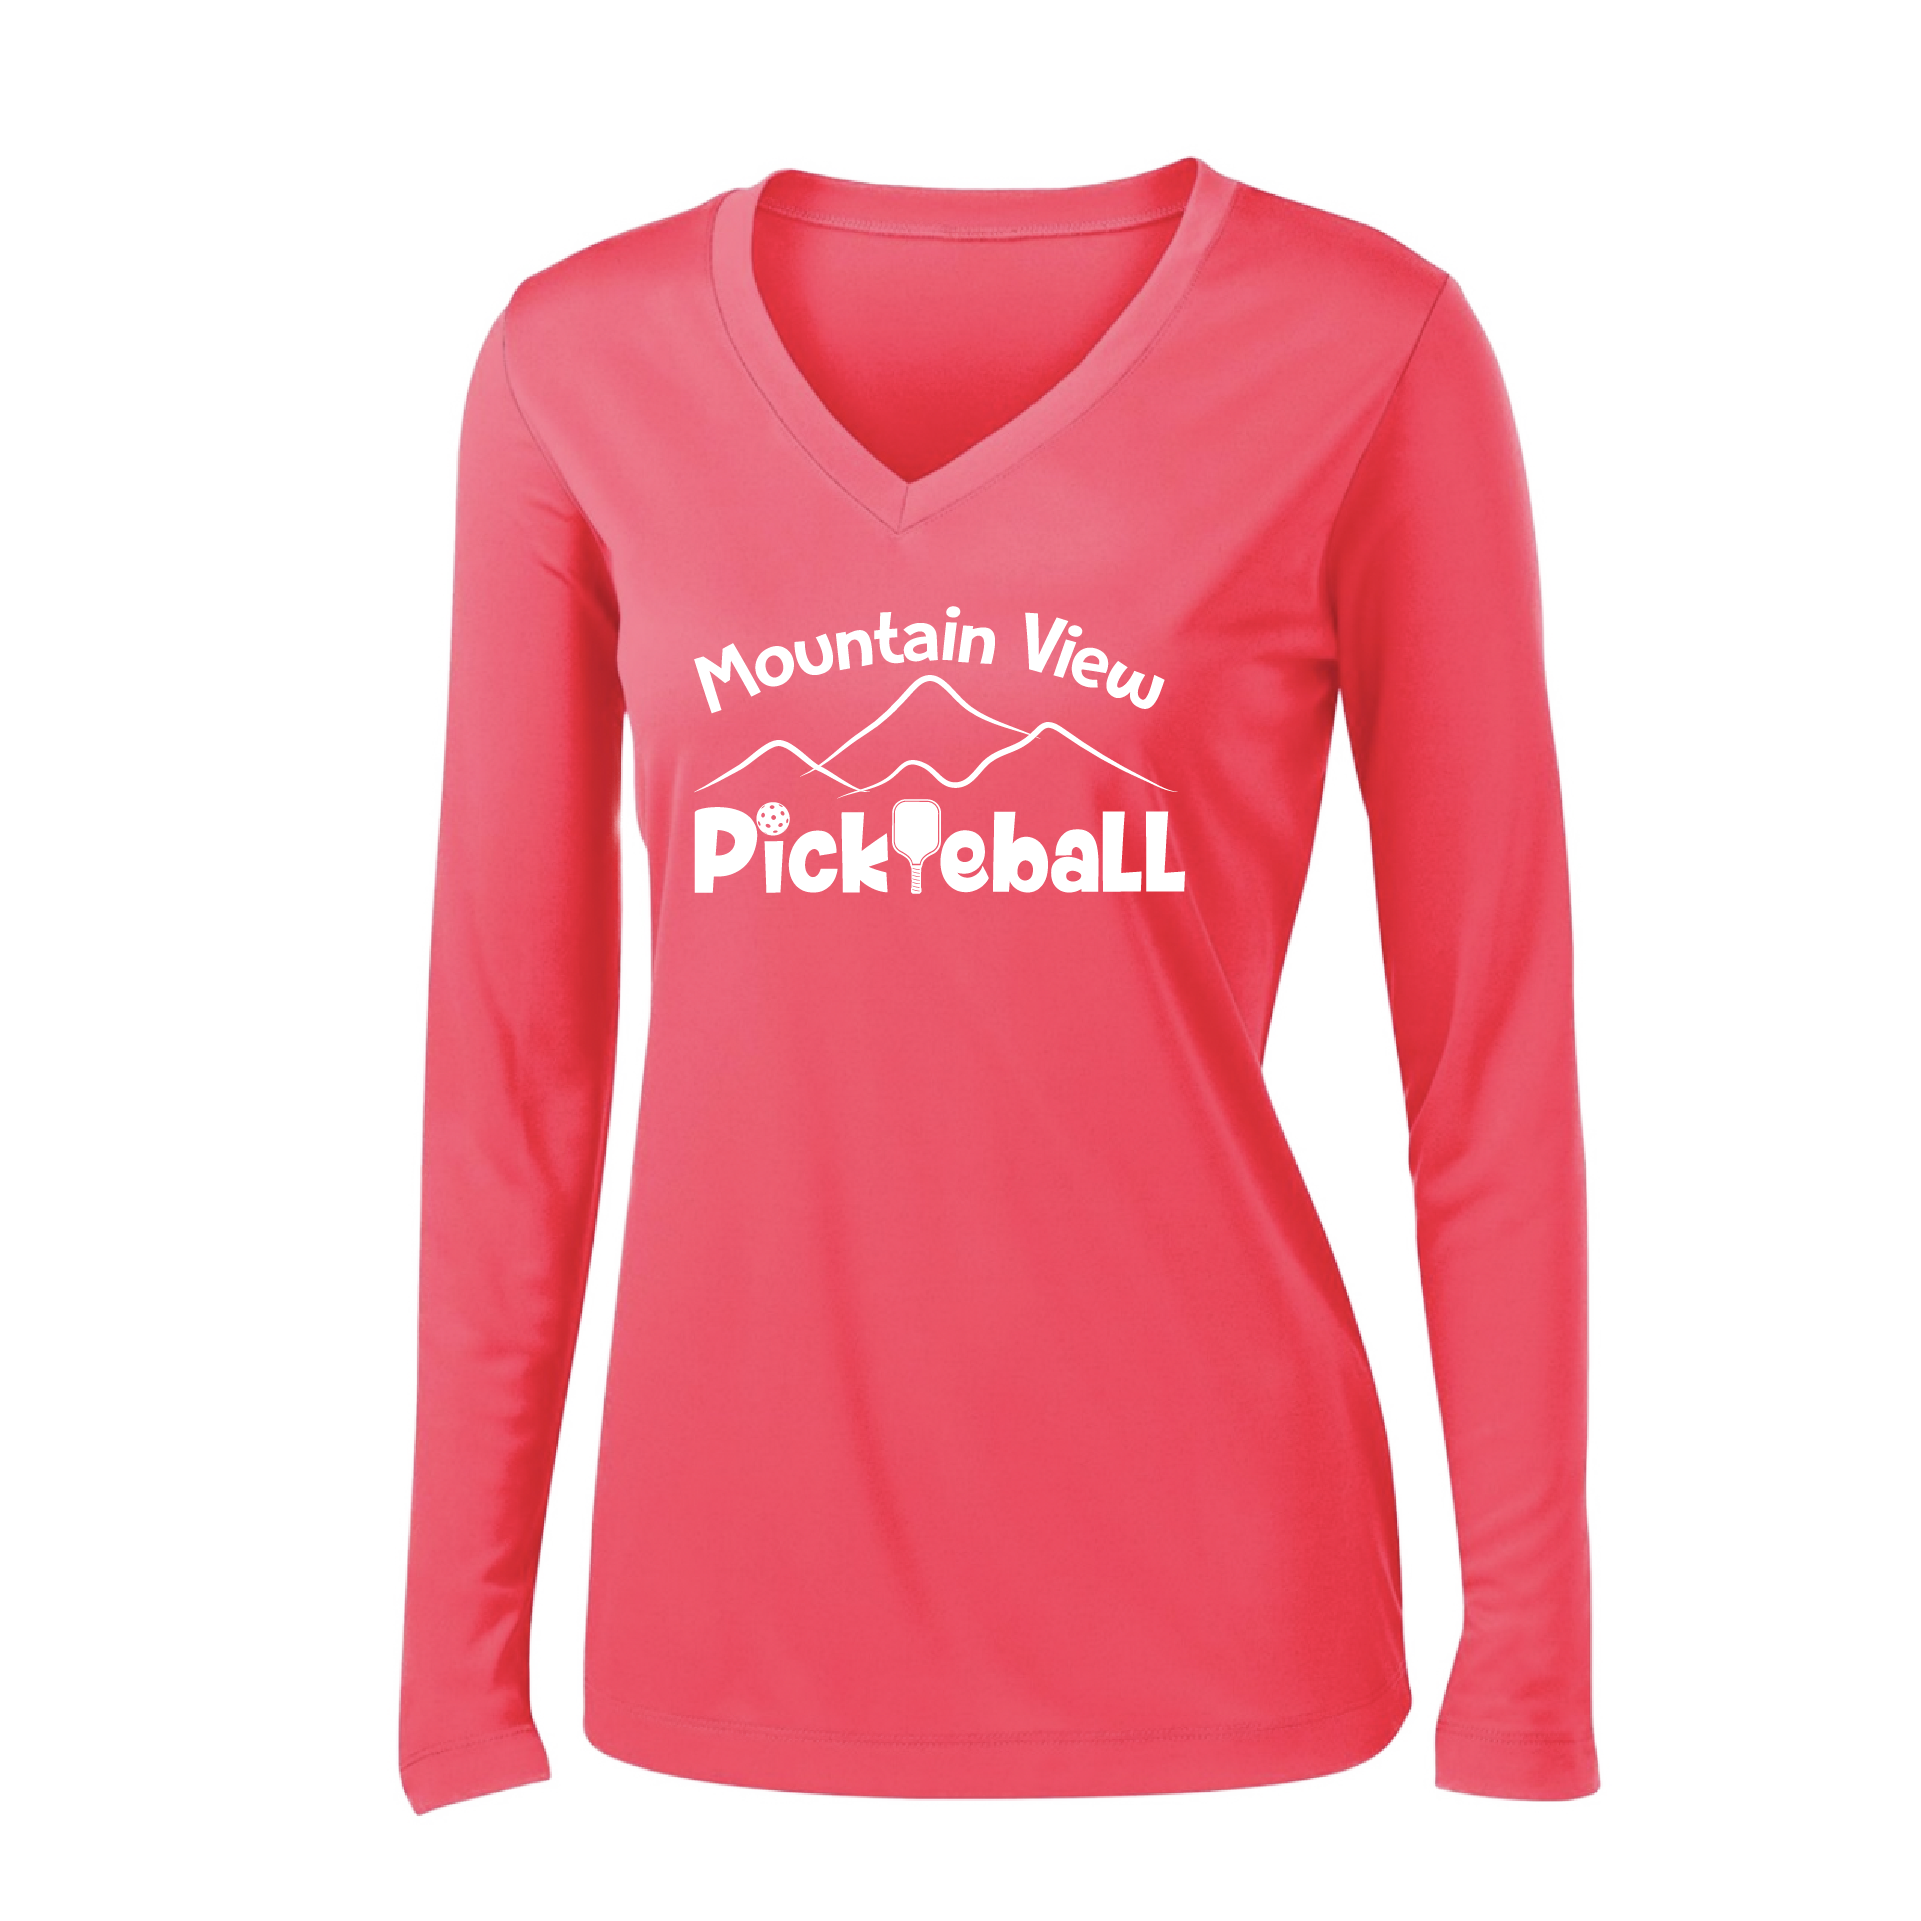 Pickleball Design: Mountain View Pickleball Club  Women's Style: Long-Sleeve V-Neck  Turn up the volume in this Women's shirt with its perfect mix of softness and attitude. Material is ultra-comfortable with moisture wicking properties and tri-blend softness. PosiCharge technology locks in color. Highly breathable and lightweight.